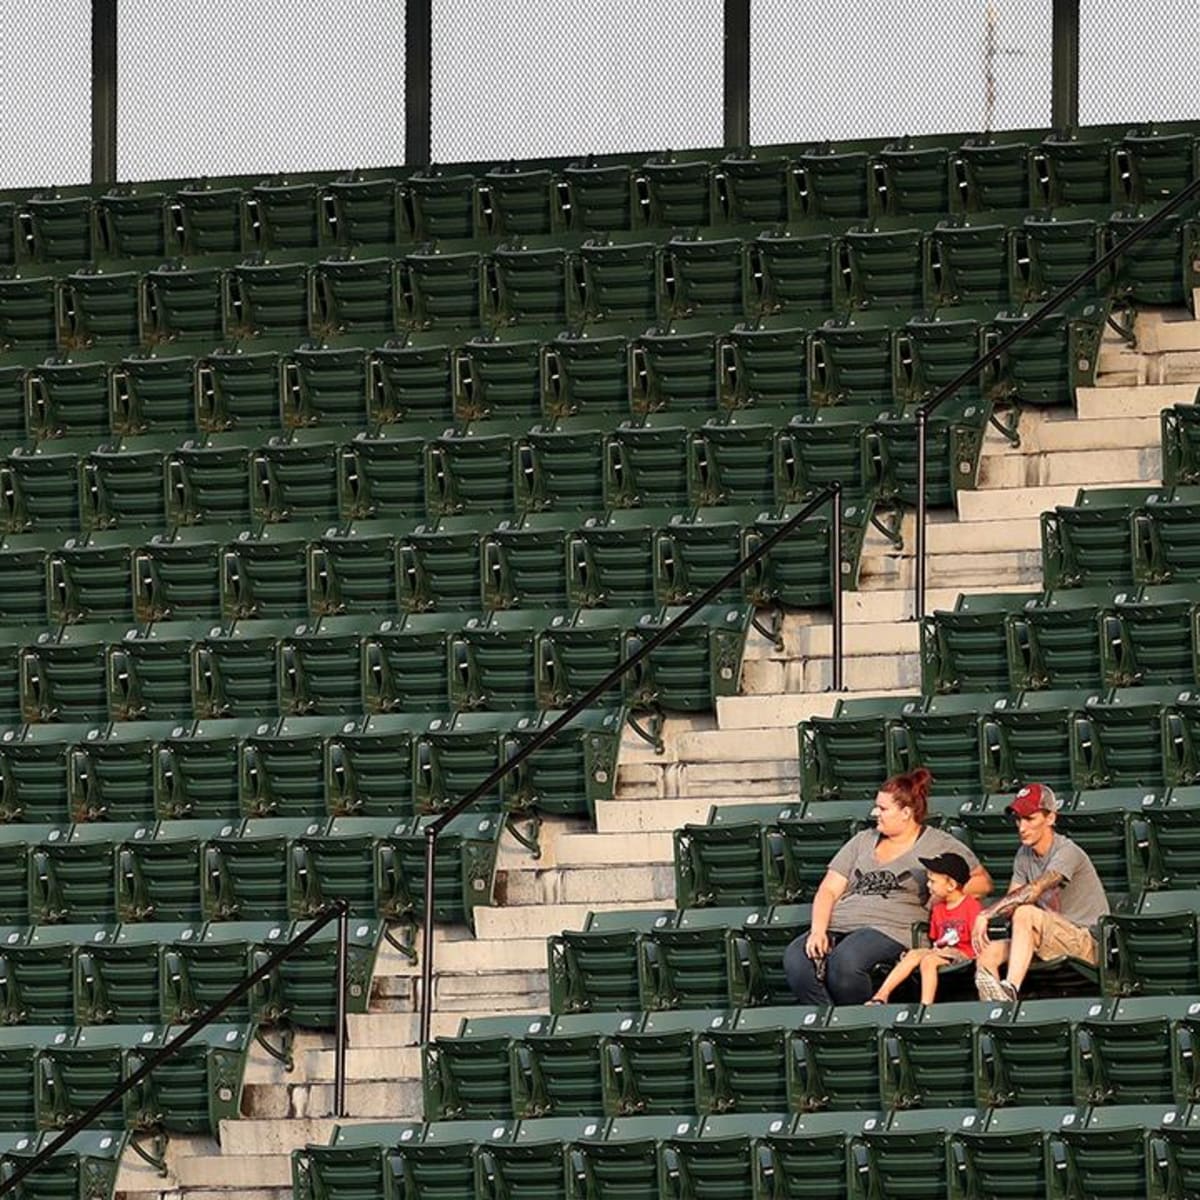 MLB attendance declines, but is a fix realistic? - Sports Illustrated